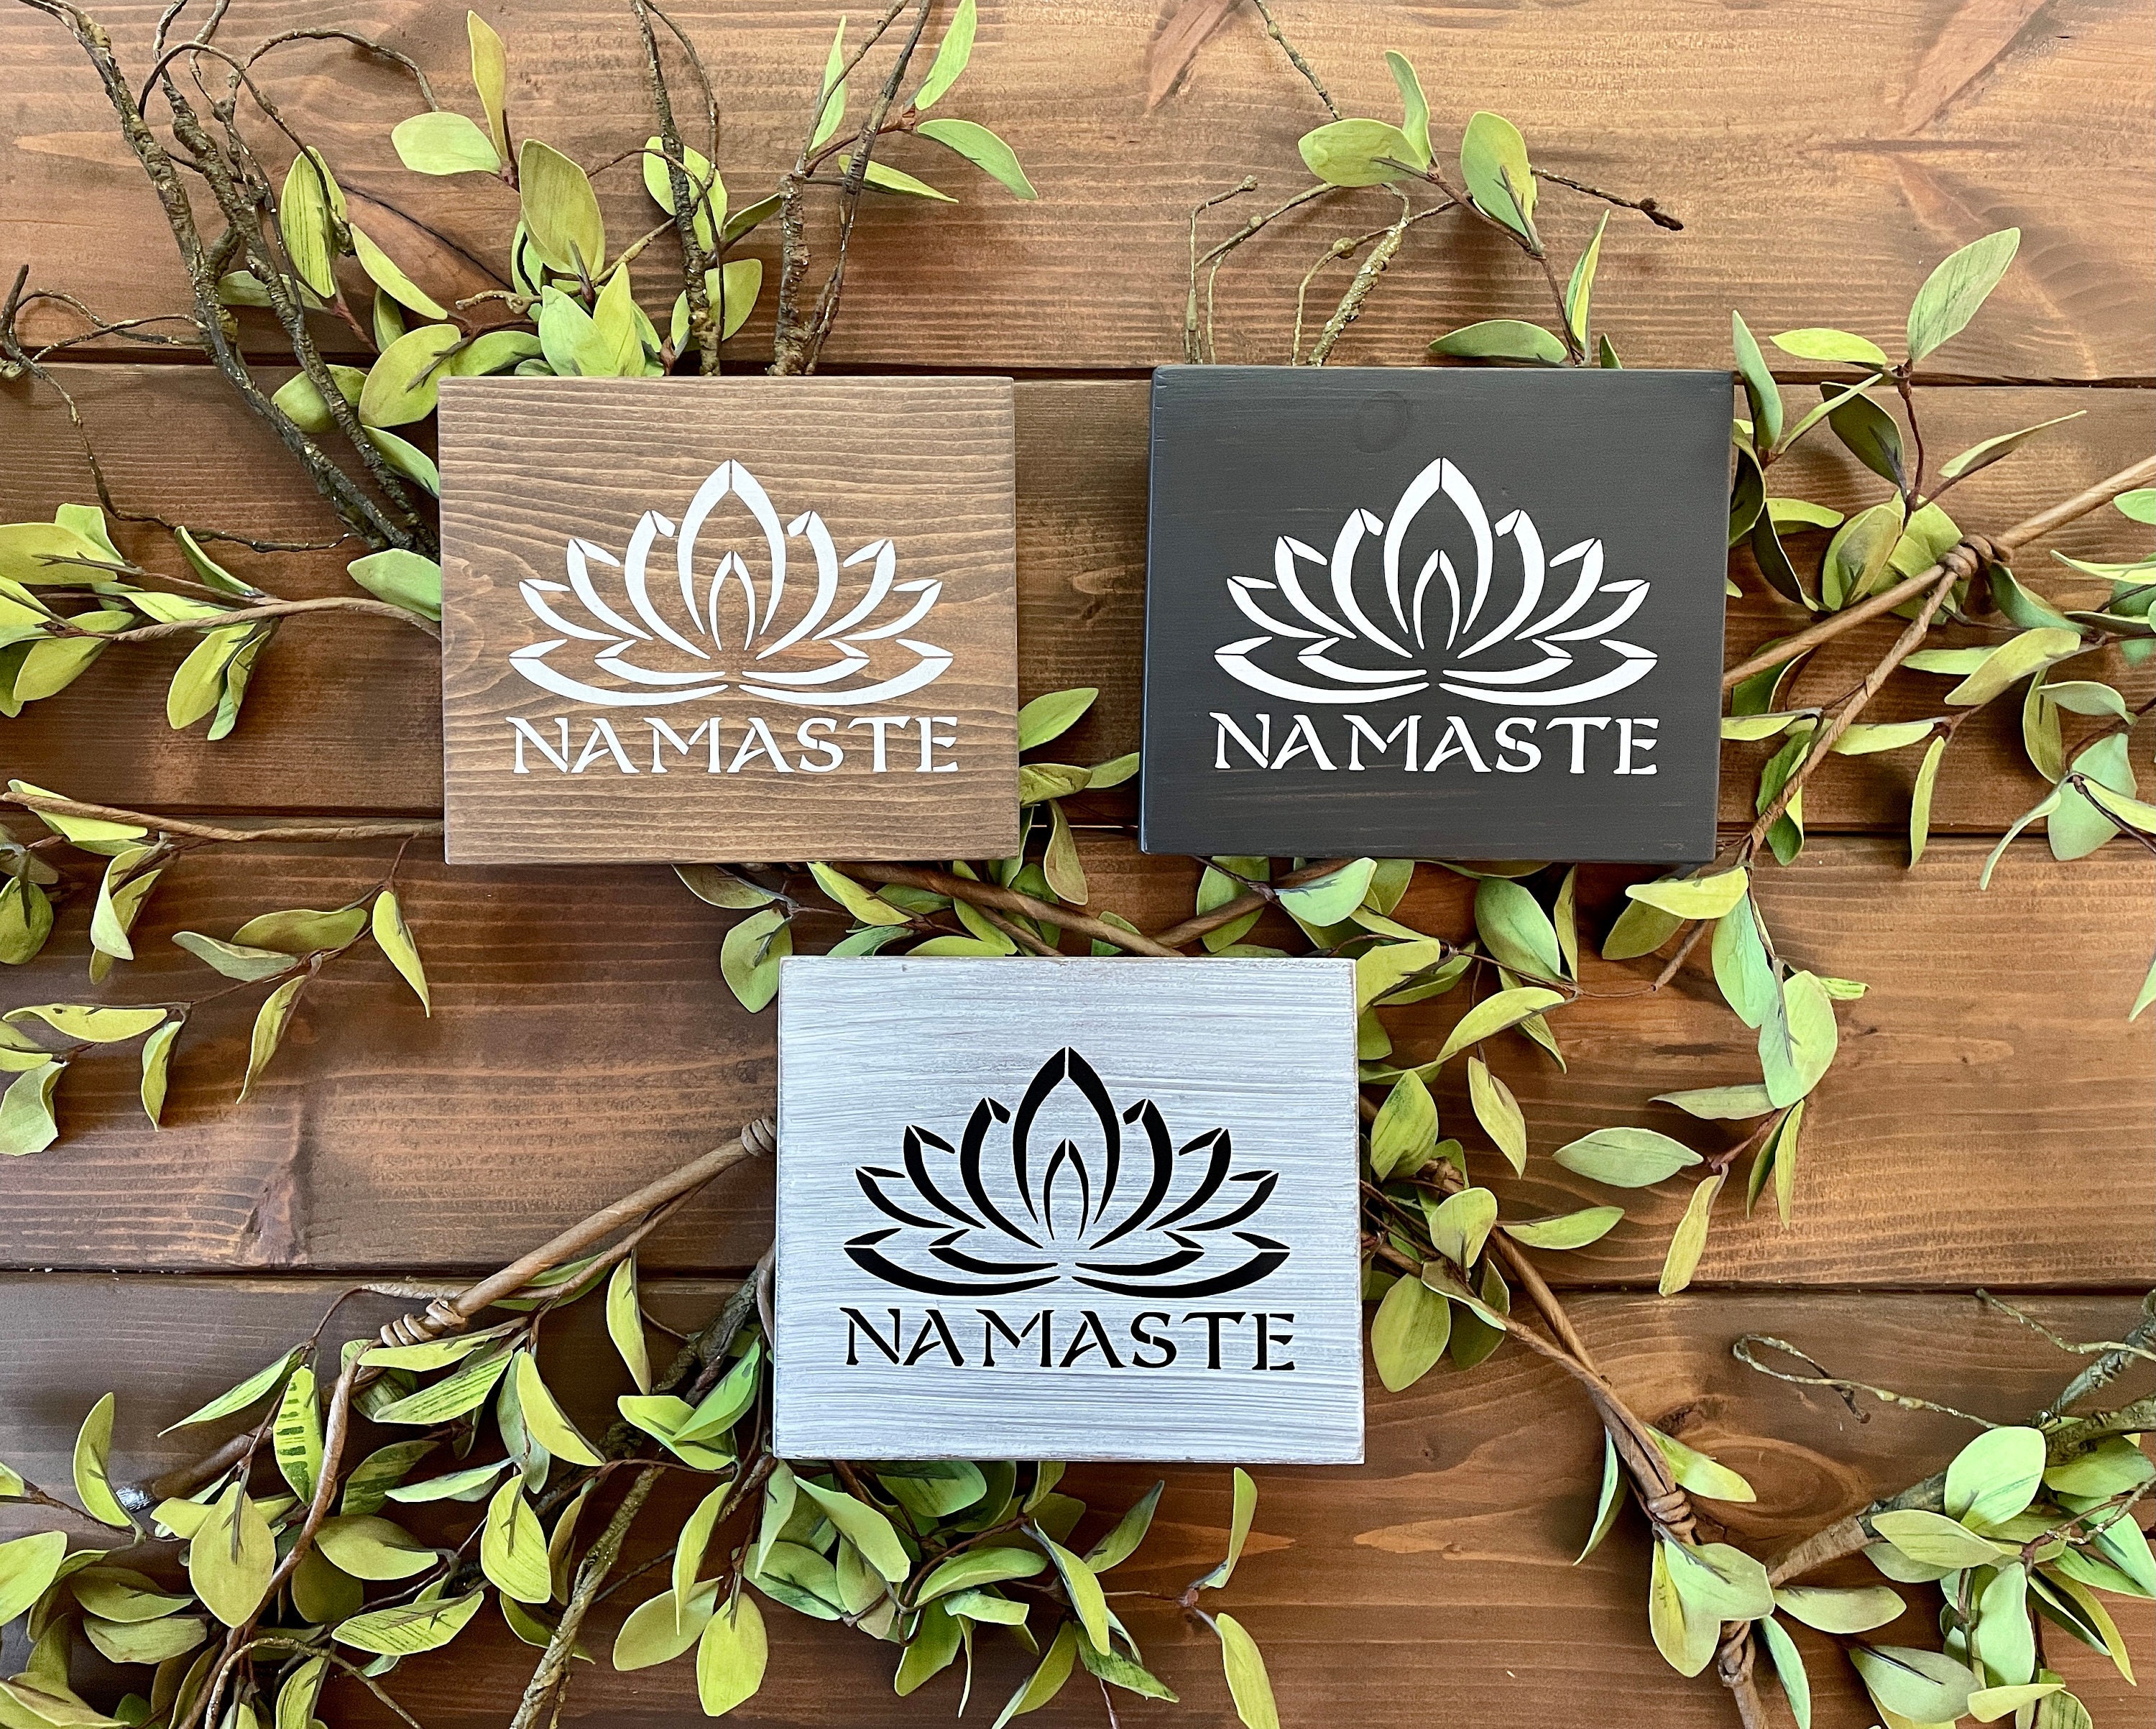 Namaste Wood Sign Shelf Sitter | 6.5x5.5. #shopforacause - Portion Of Proceeds Donated To Child Hunger Relief Organization"